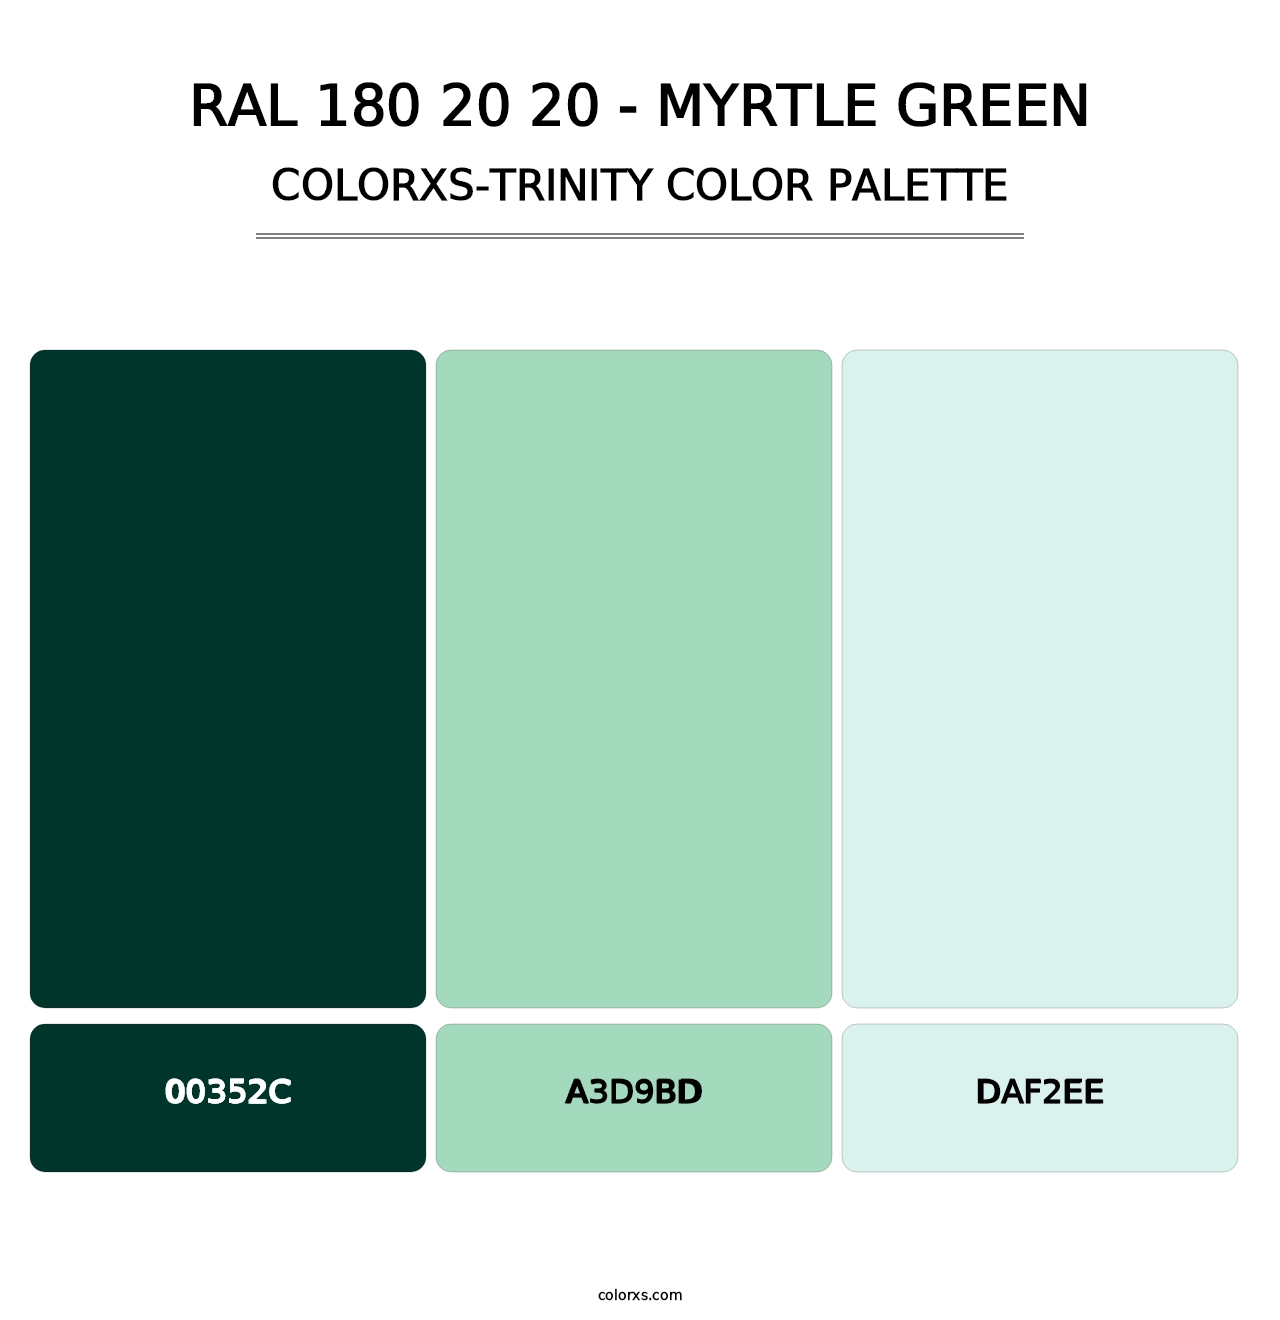 RAL 180 20 20 - Myrtle Green - Colorxs Trinity Palette